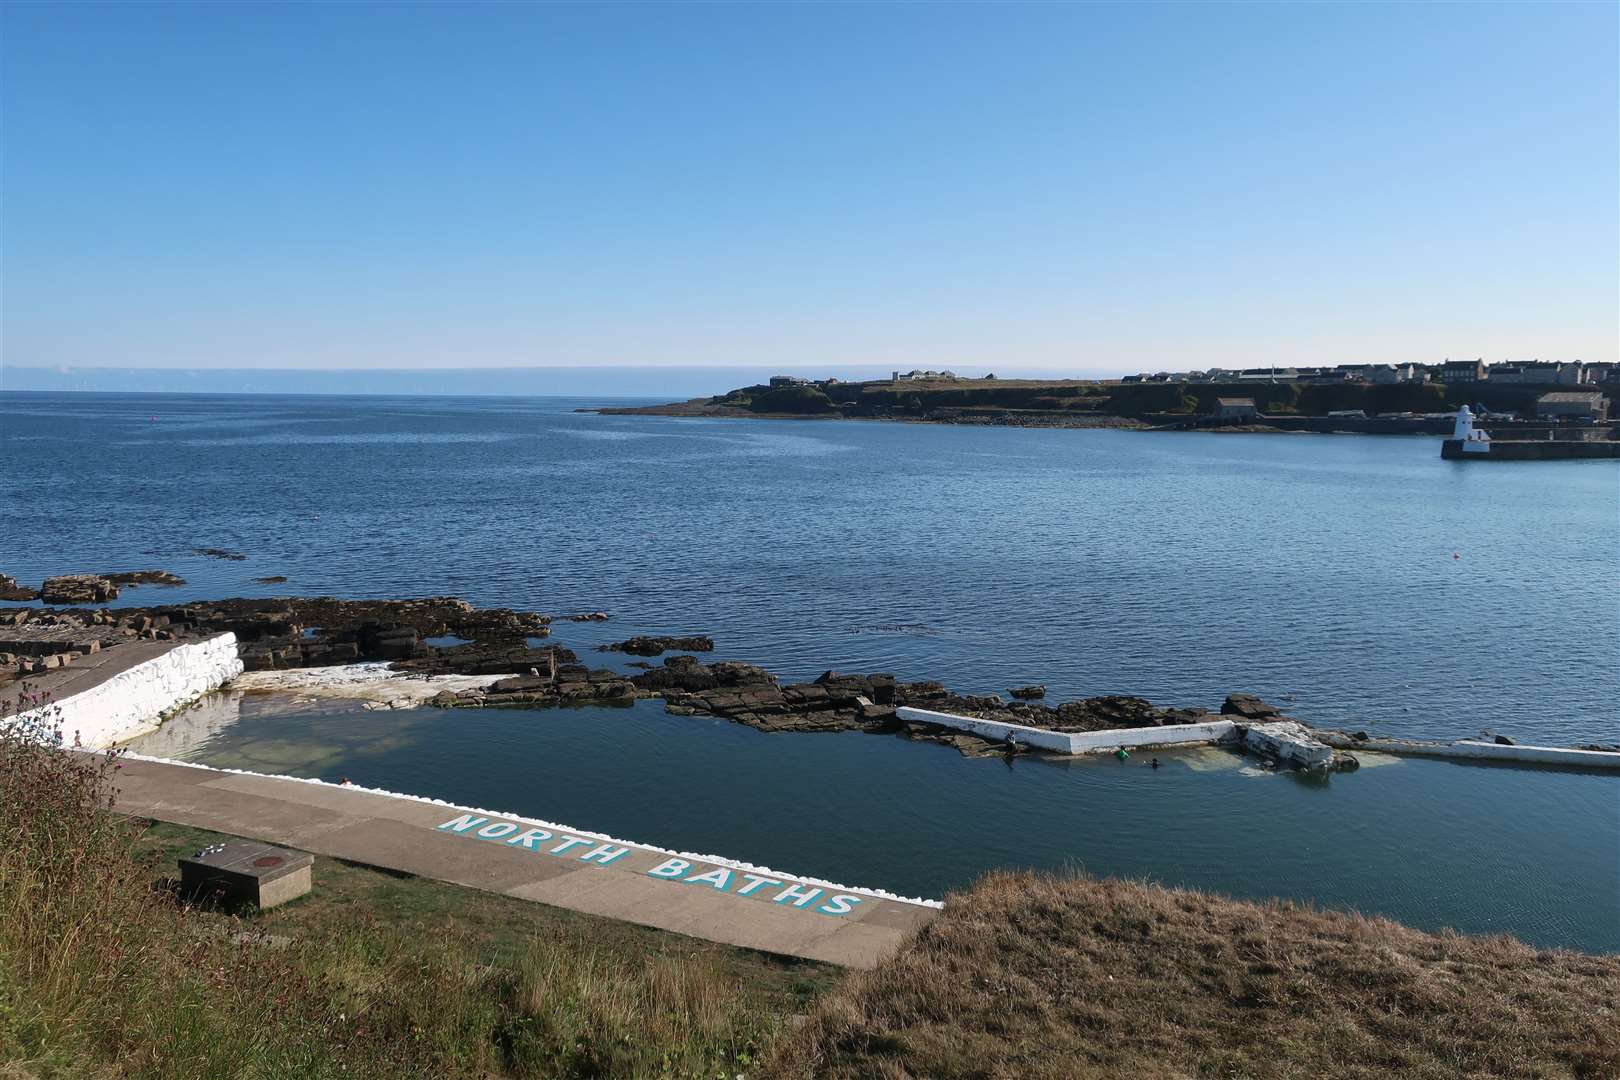 Looking over the North Baths and Wick Bay towards the South Head.